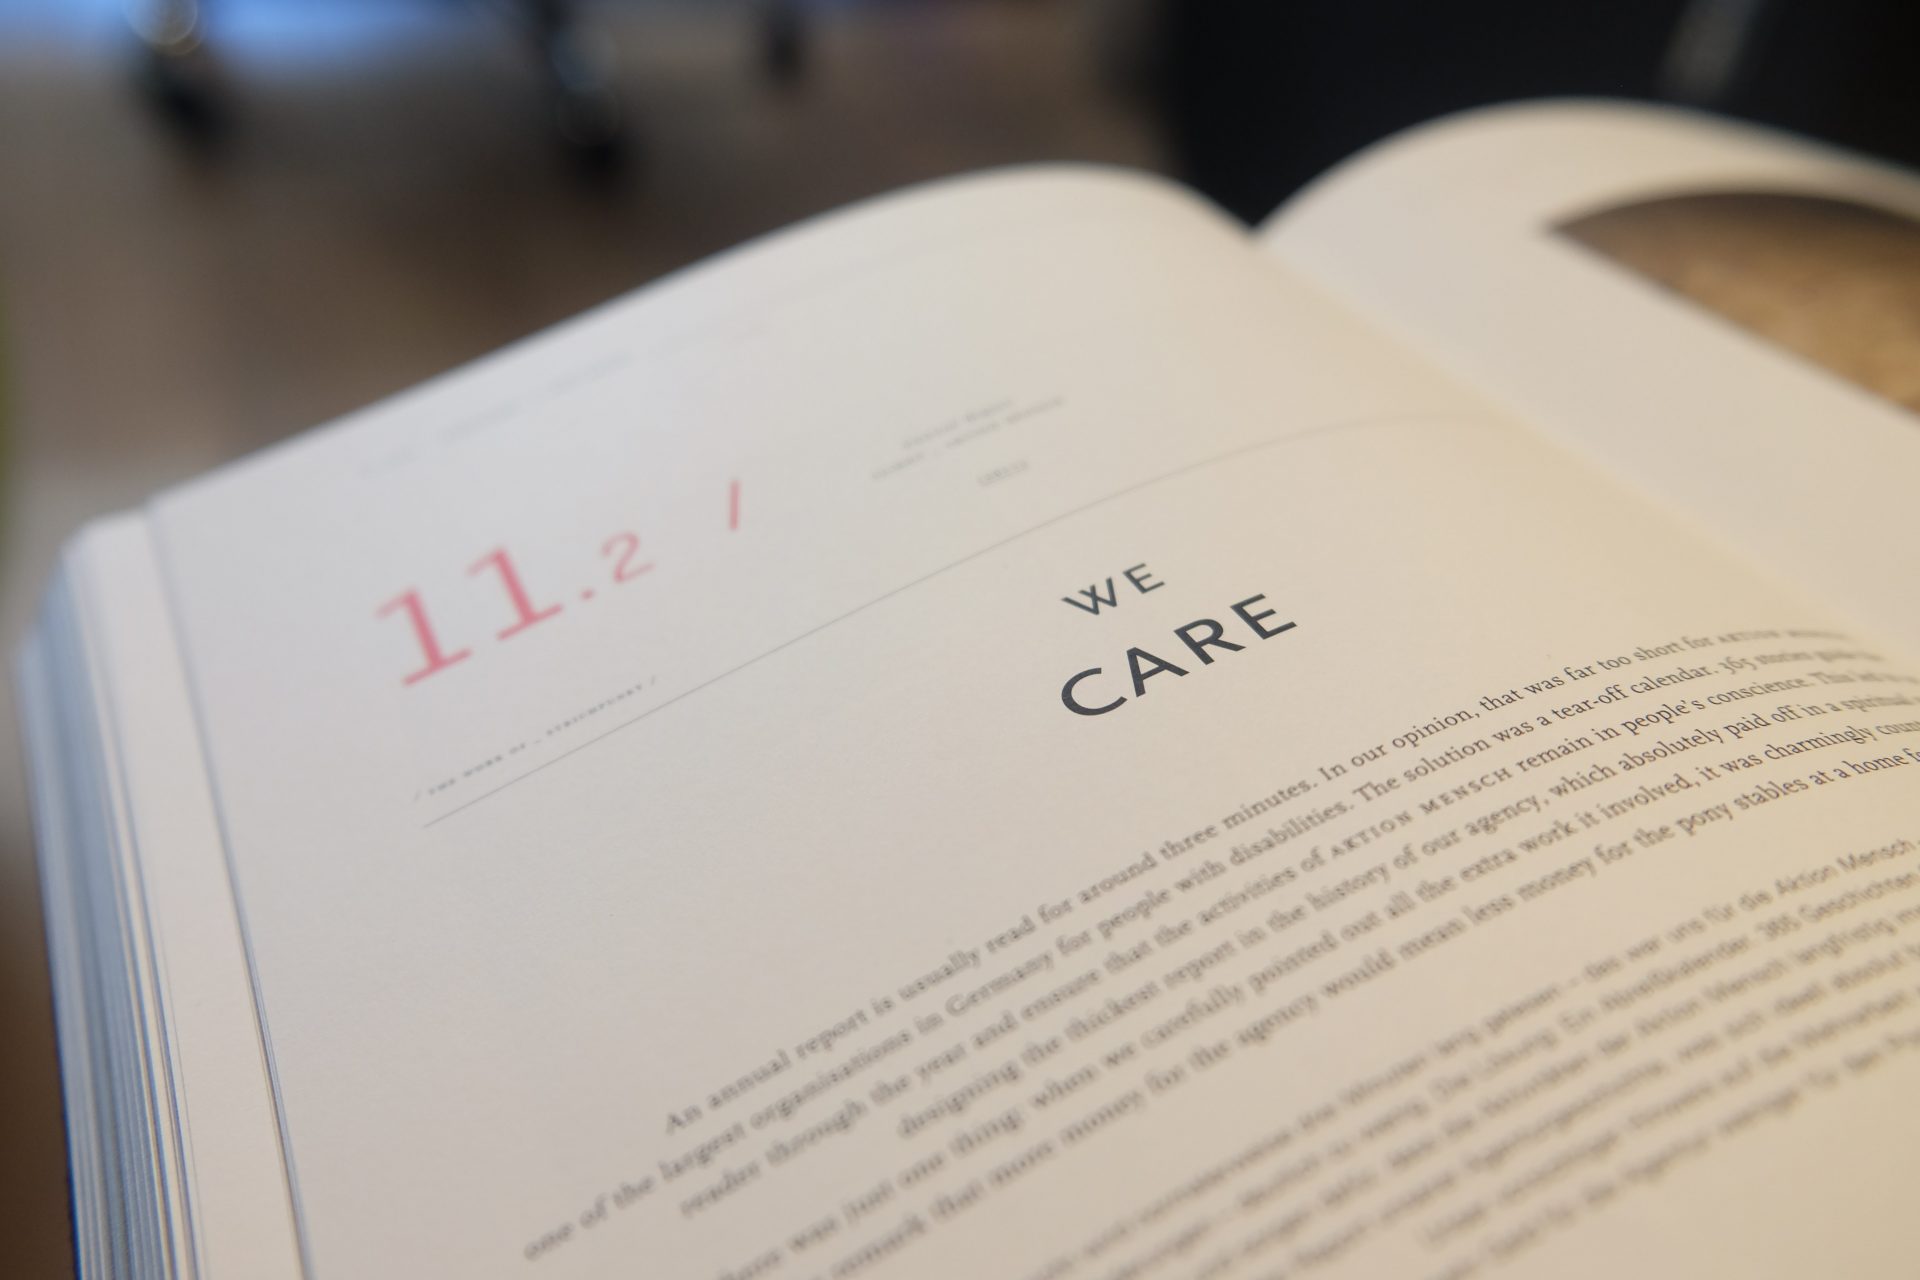 care sector book